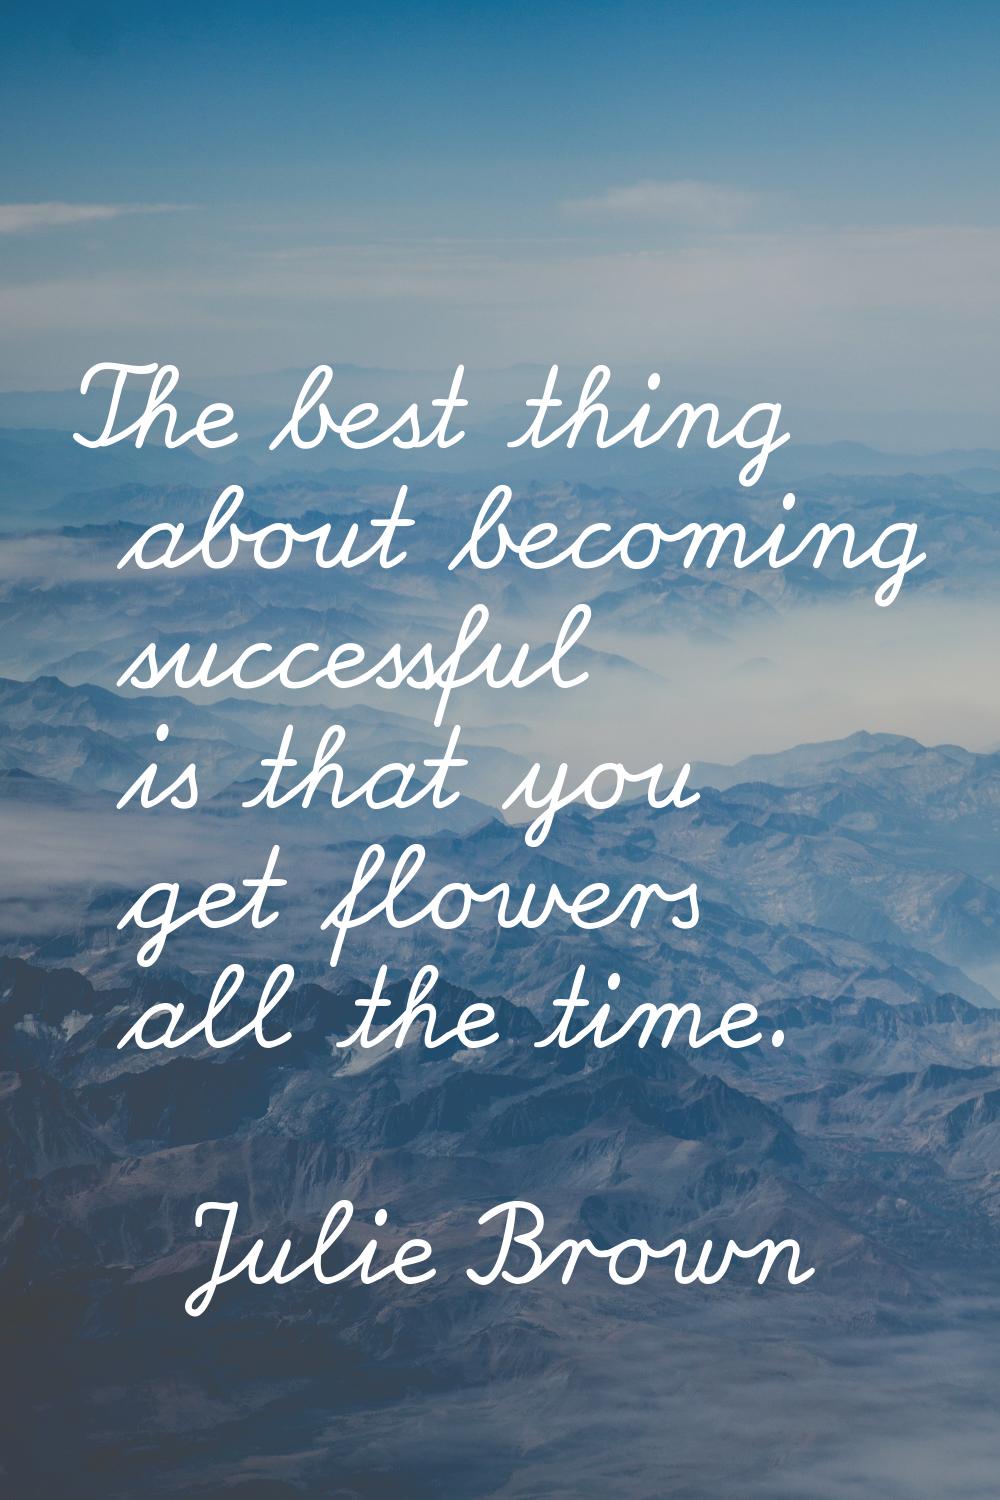 The best thing about becoming successful is that you get flowers all the time.